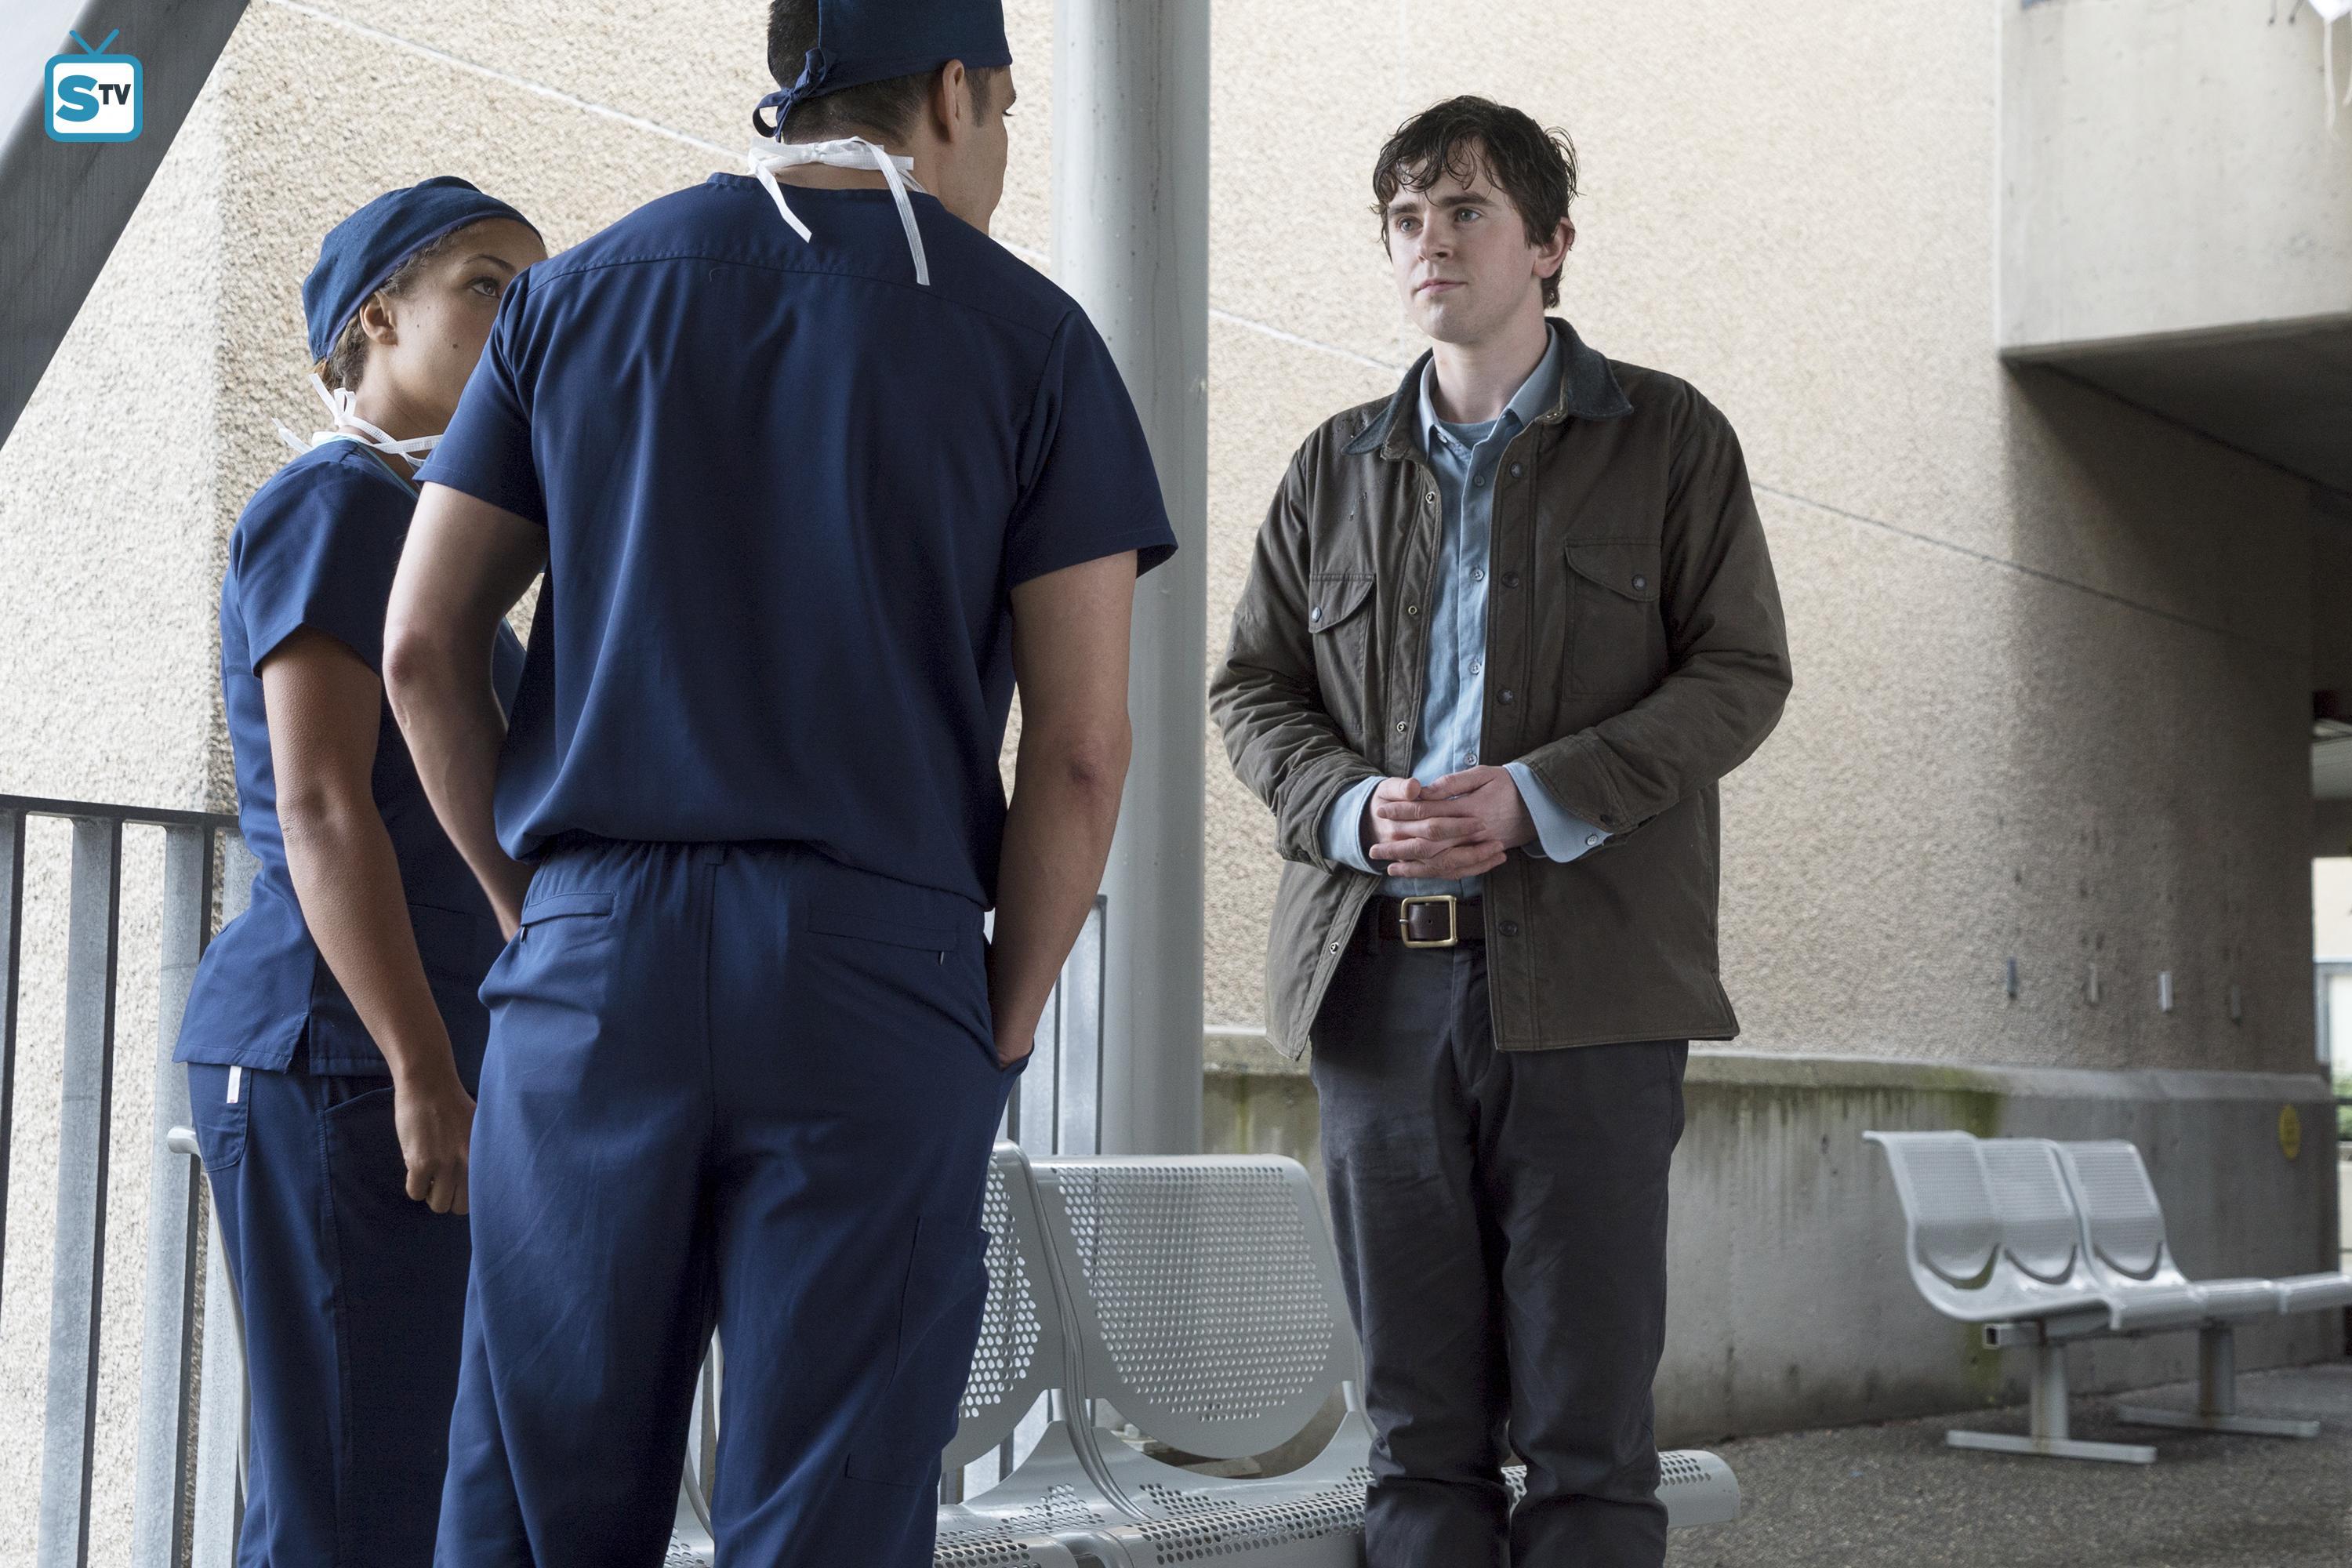 The Good Doctor image 1x01 'Burnt Food' Promotional Photo HD